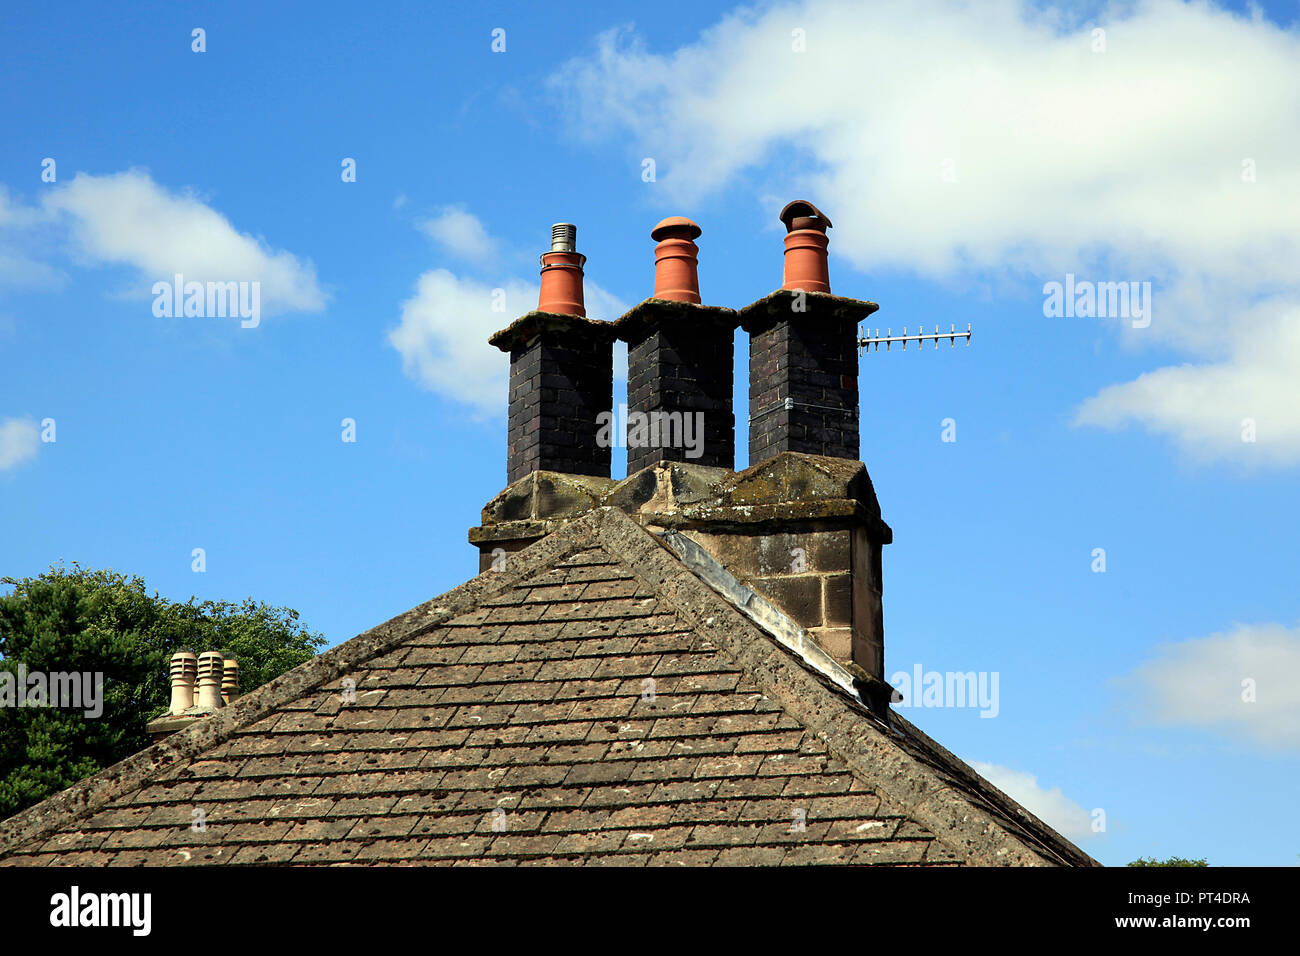 Triple chimney stack on house roof Stock Photo